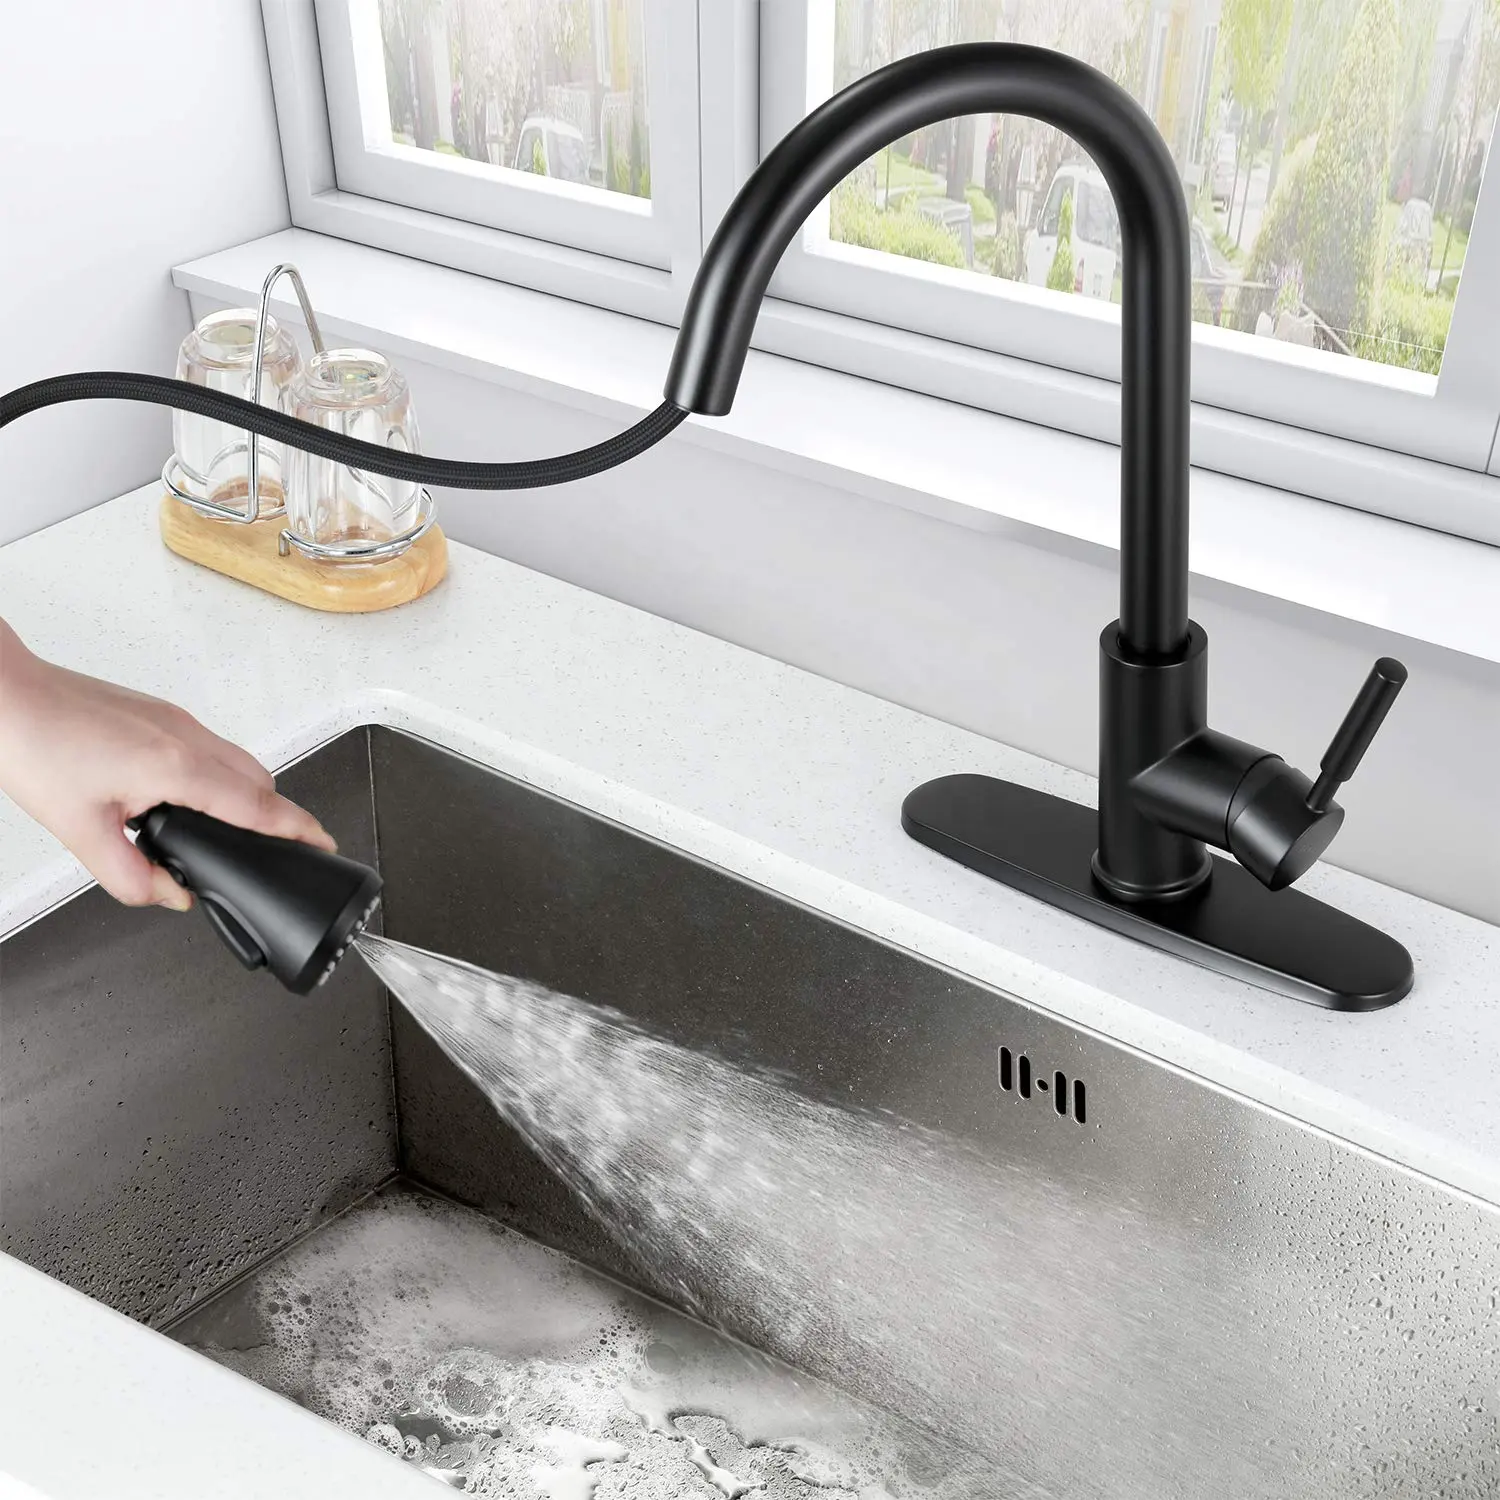 yida Commercial Kitchen Sink Faucet With Pull Down Sprayer High Arc Fit for One   3 Hole w/ Deck Plate Single Handle Industrial